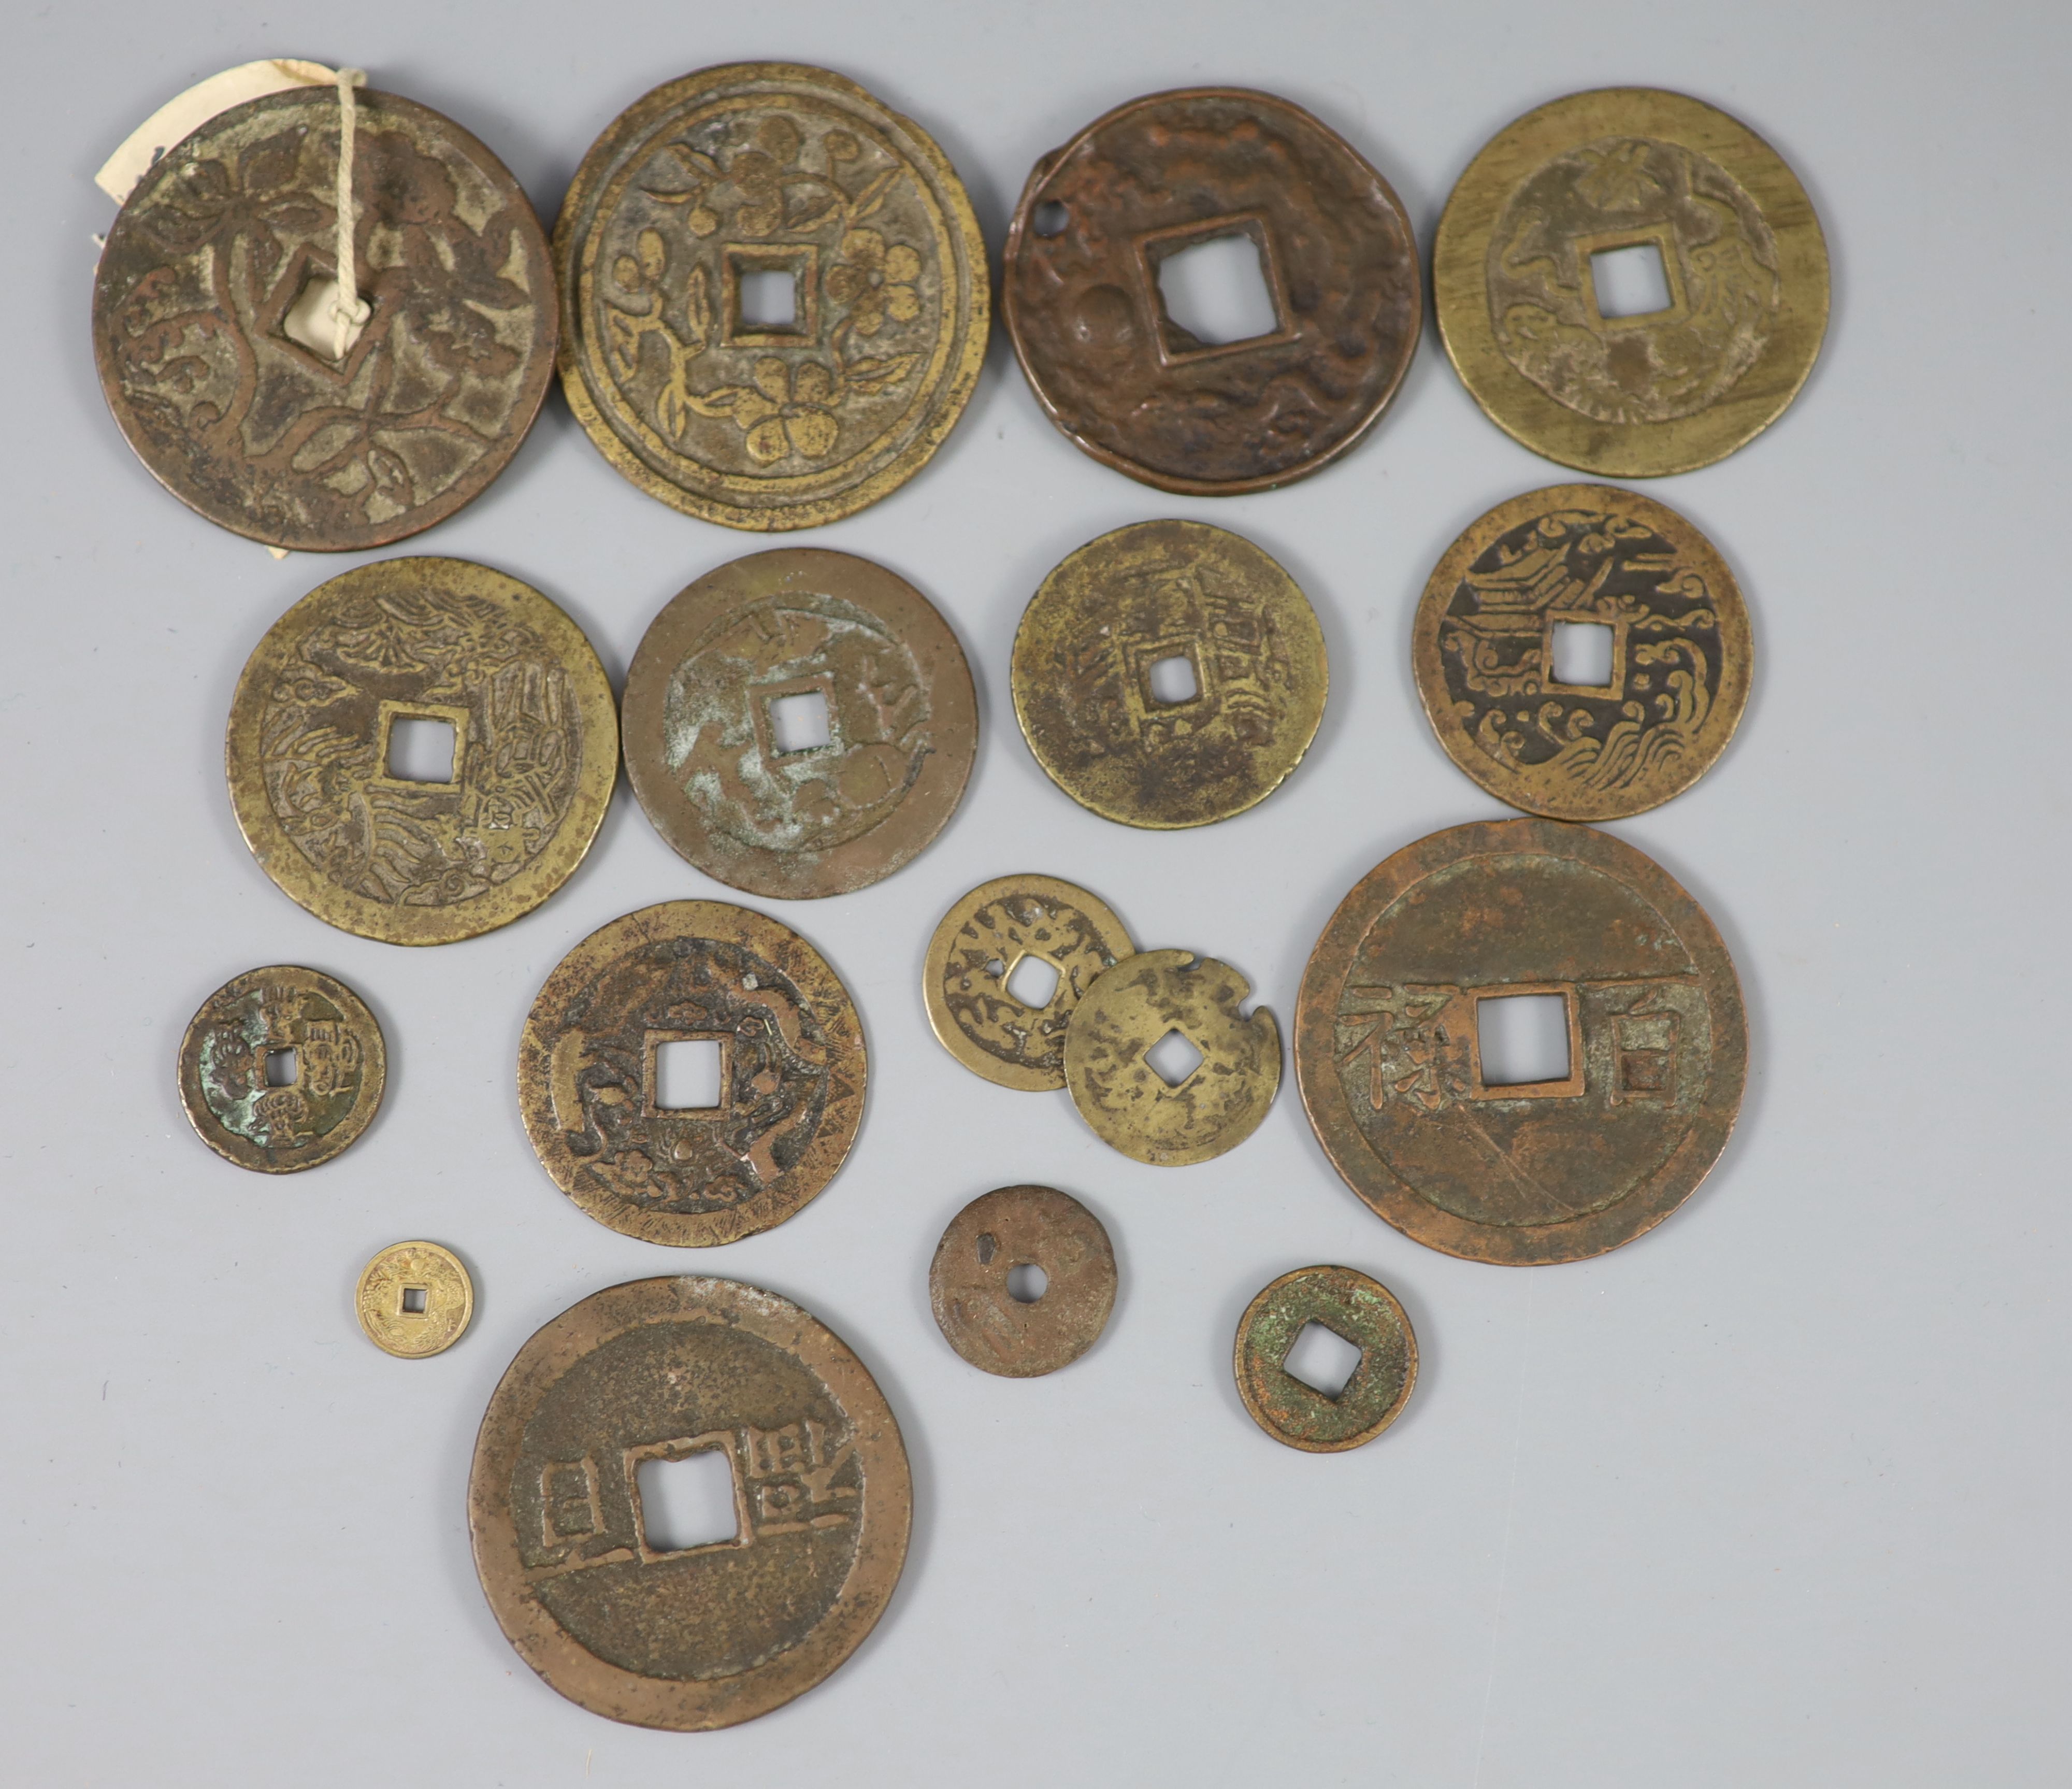 China, 17 bronze or copper charms or amulets, Qing dynasty, ranging from 18mm-54mm, VG - VF, - Bild 2 aus 2